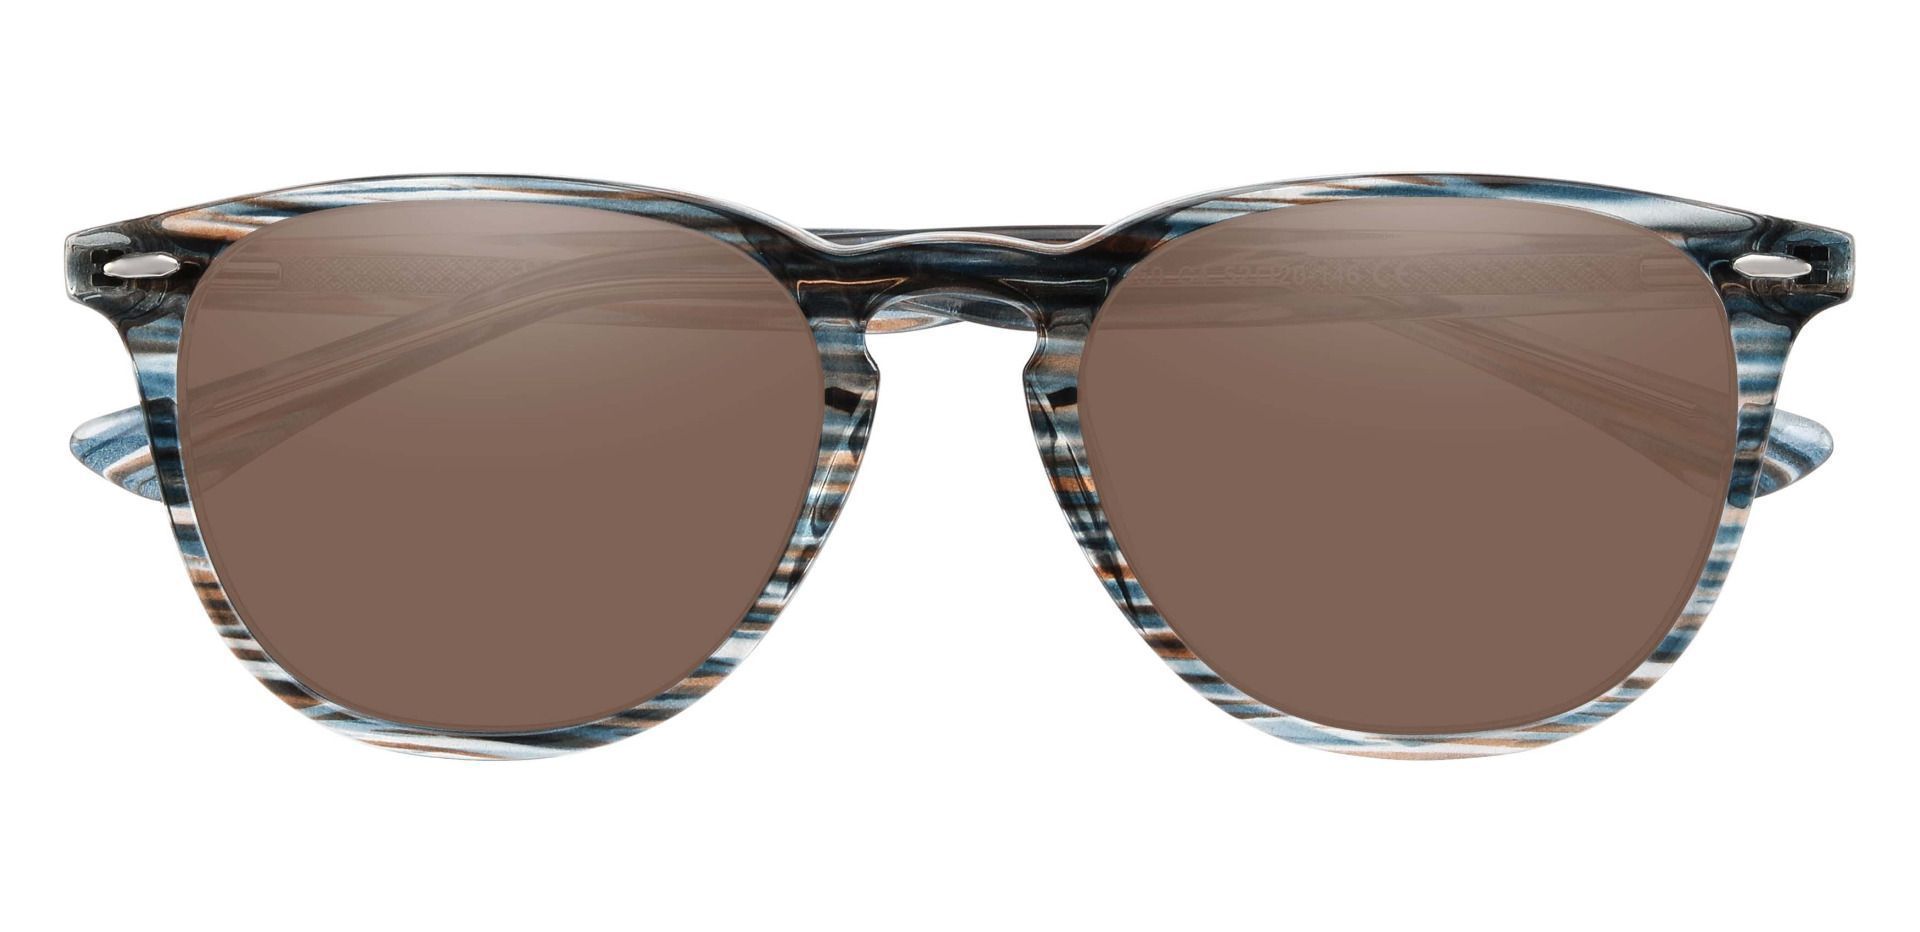 Sycamore Oval Progressive Sunglasses - Blue Frame With Brown Lenses